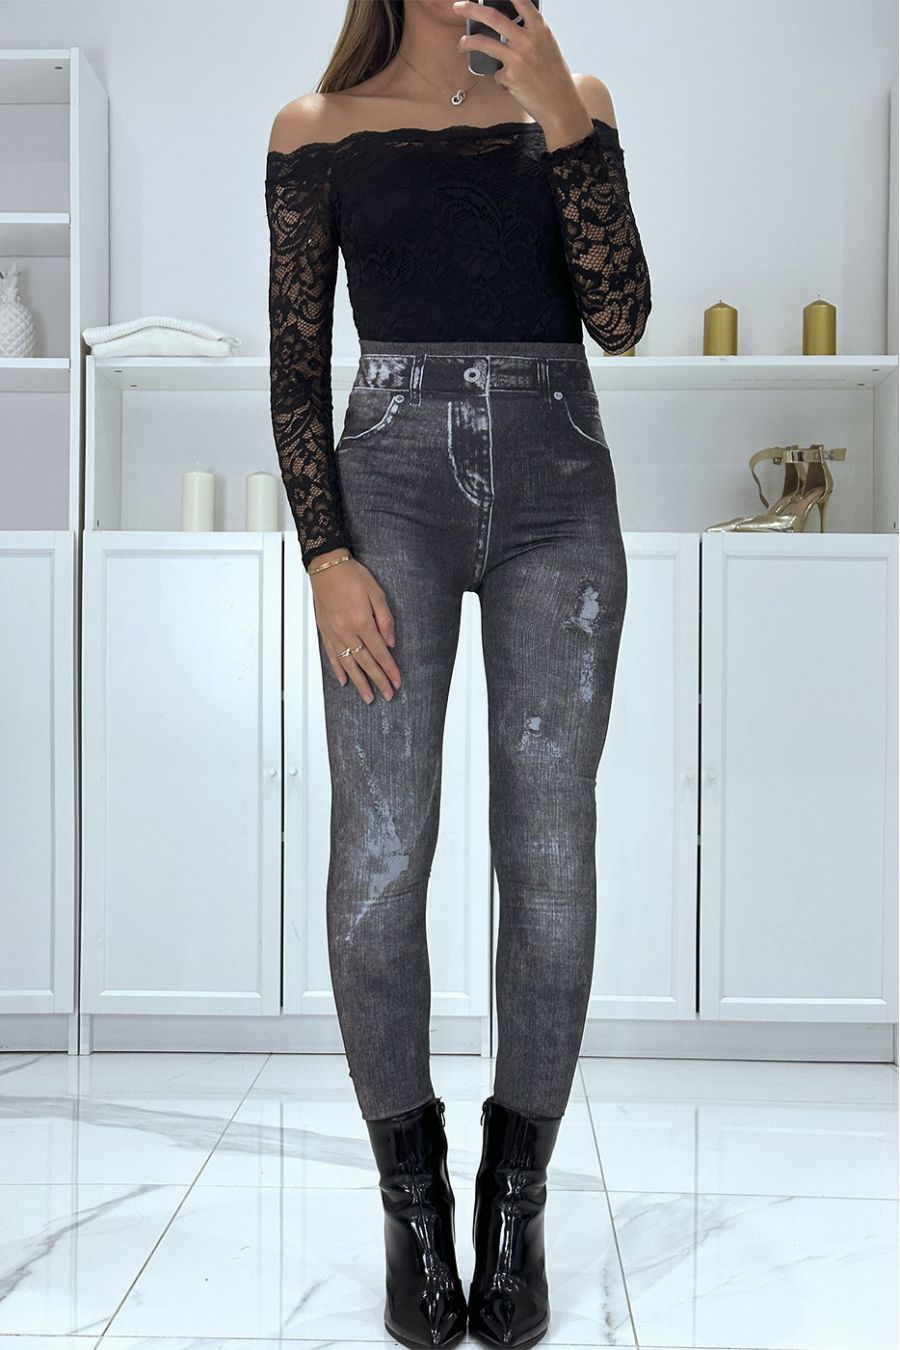 Denim effect leggings in low and high waist for all sizes